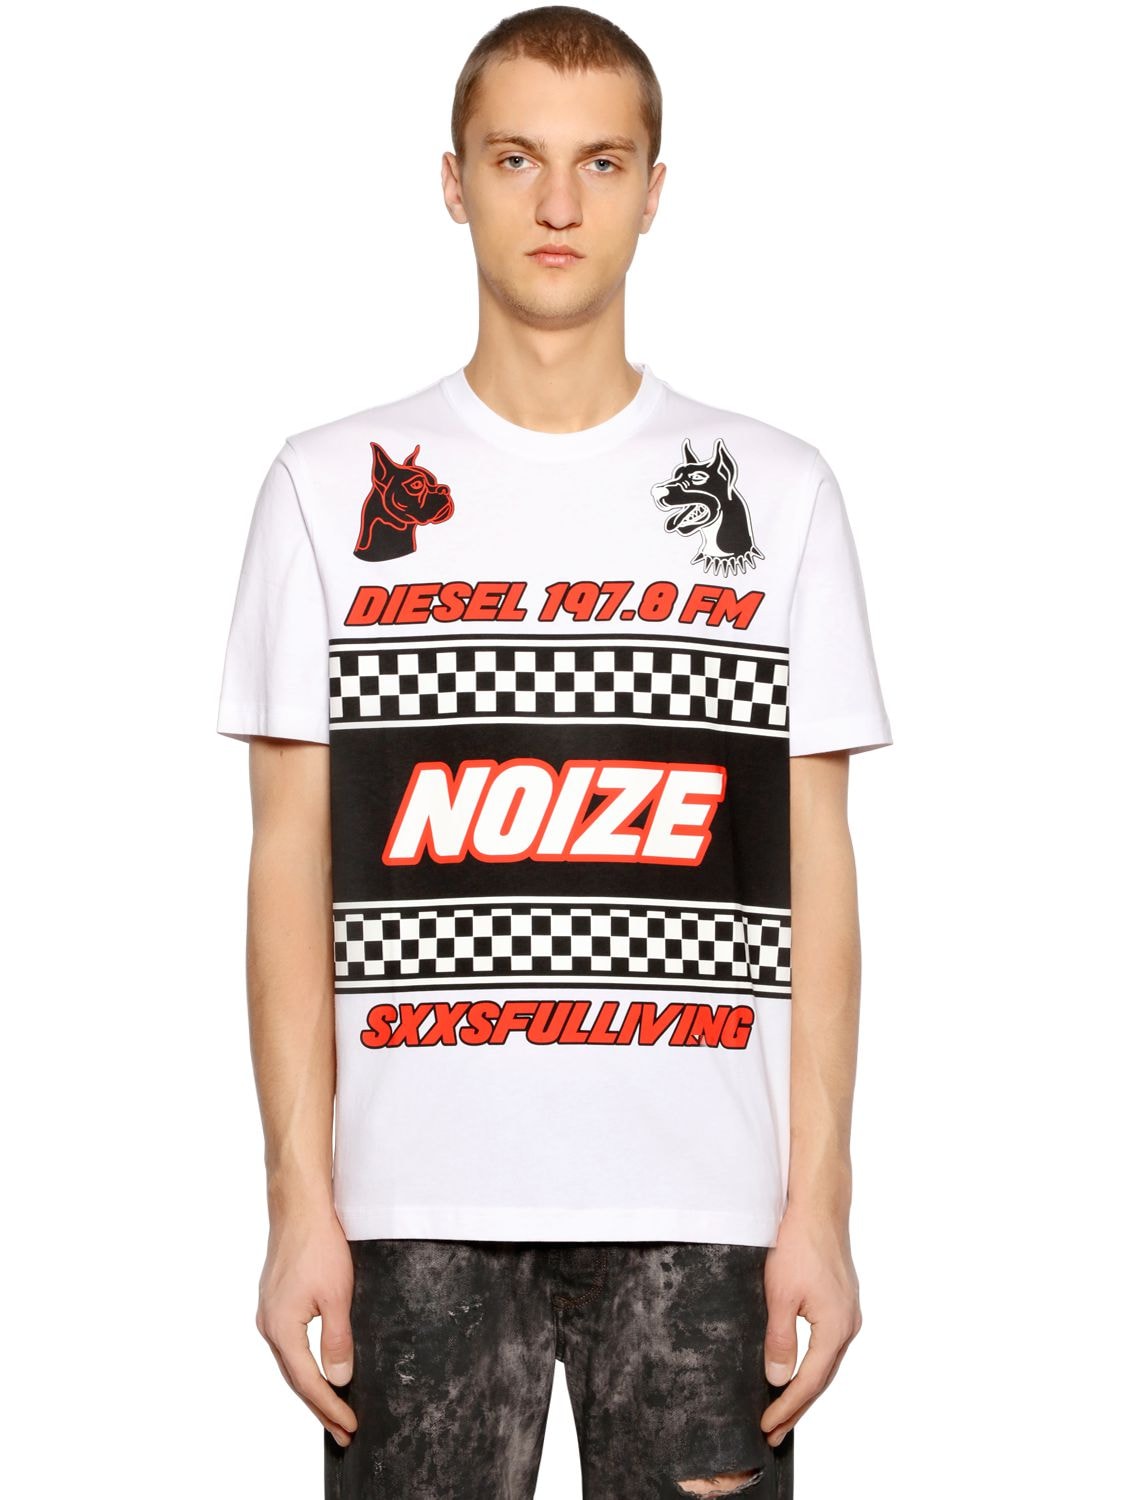 DIESEL NOIZE PRINTED COTTON JERSEY T-SHIRT,68I1W0003-MTAw0